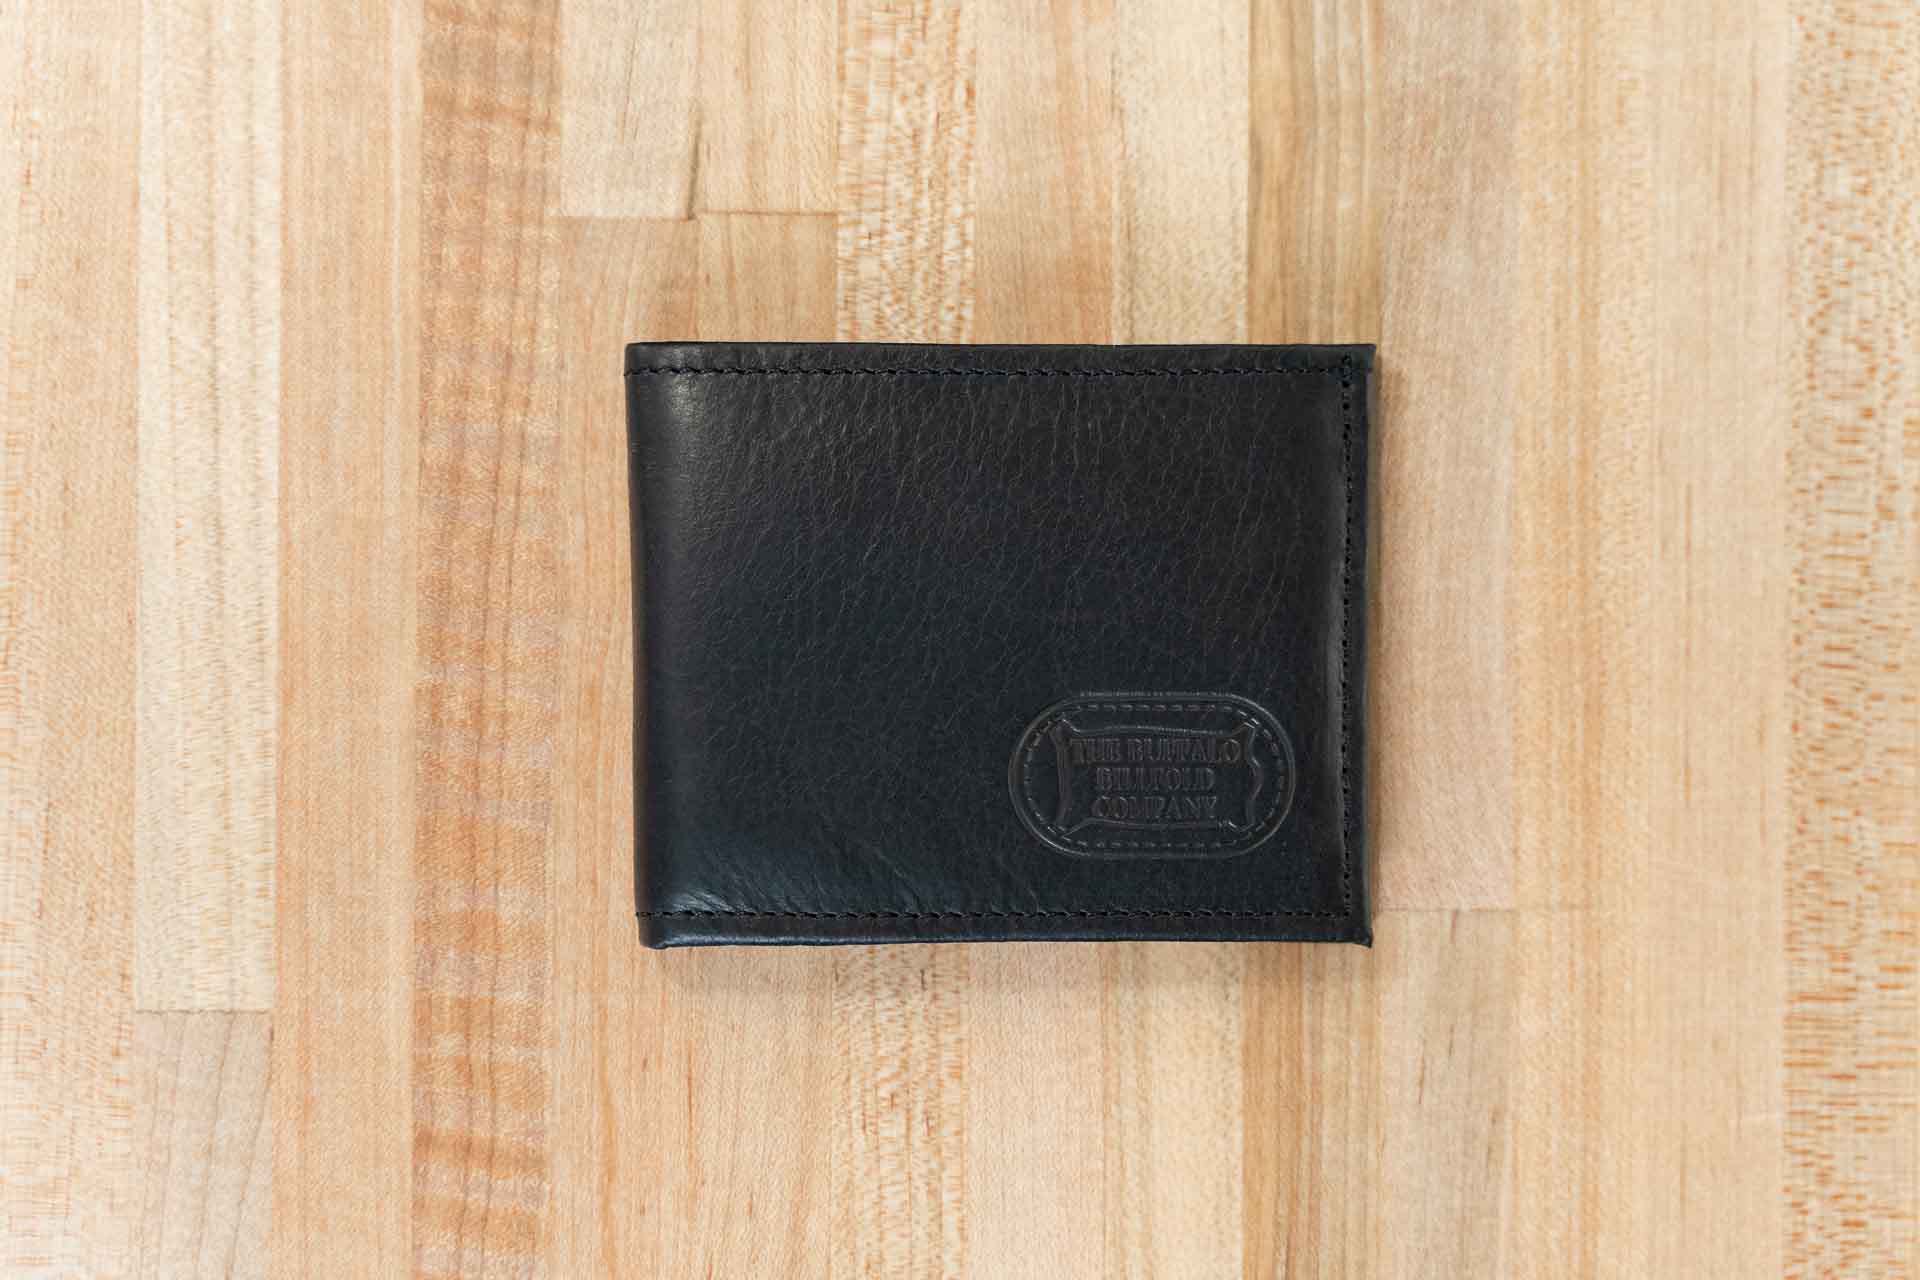 Brothers & Sons Men's Brown Key Chain & Wallet